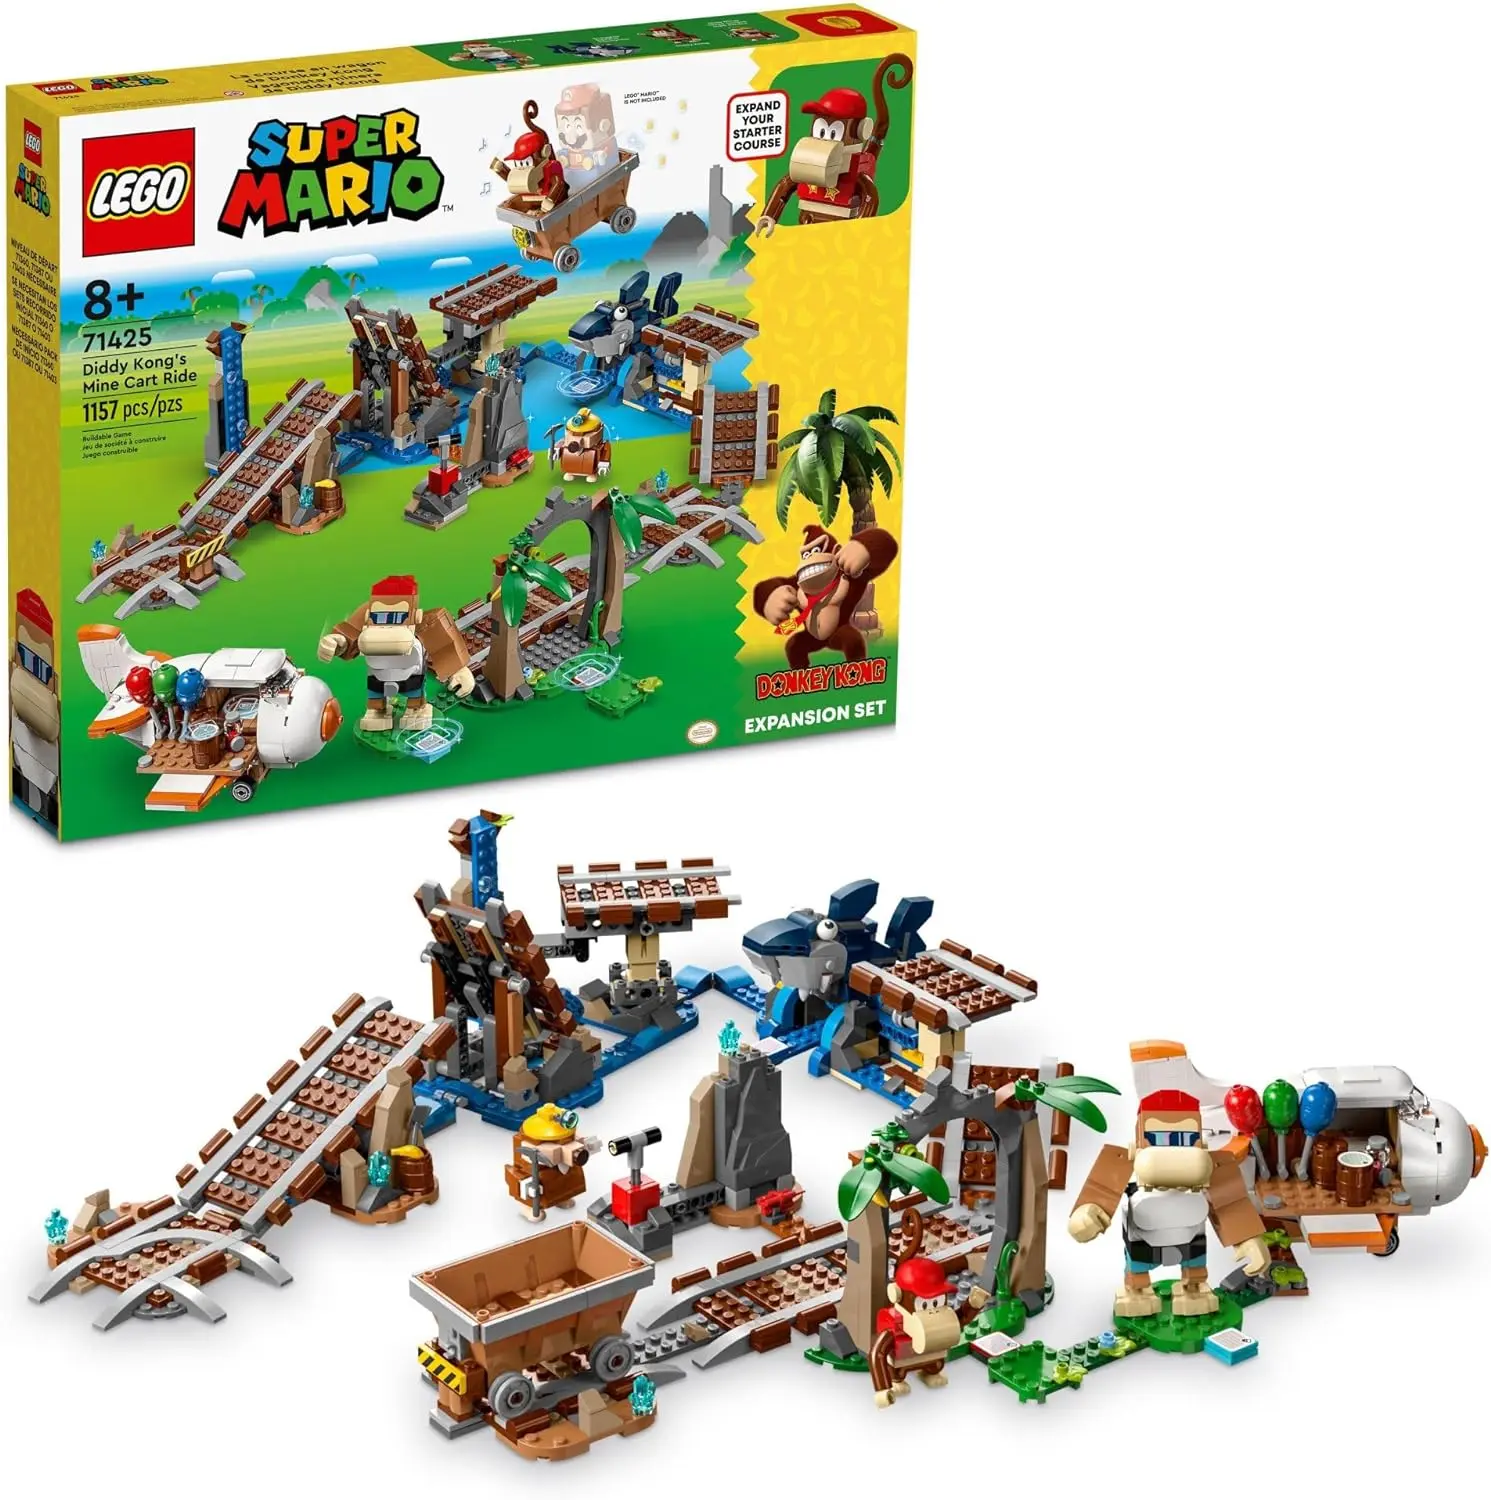 Lego Diddy Kong's Mine Cart Ride Expansion | Image: Lego